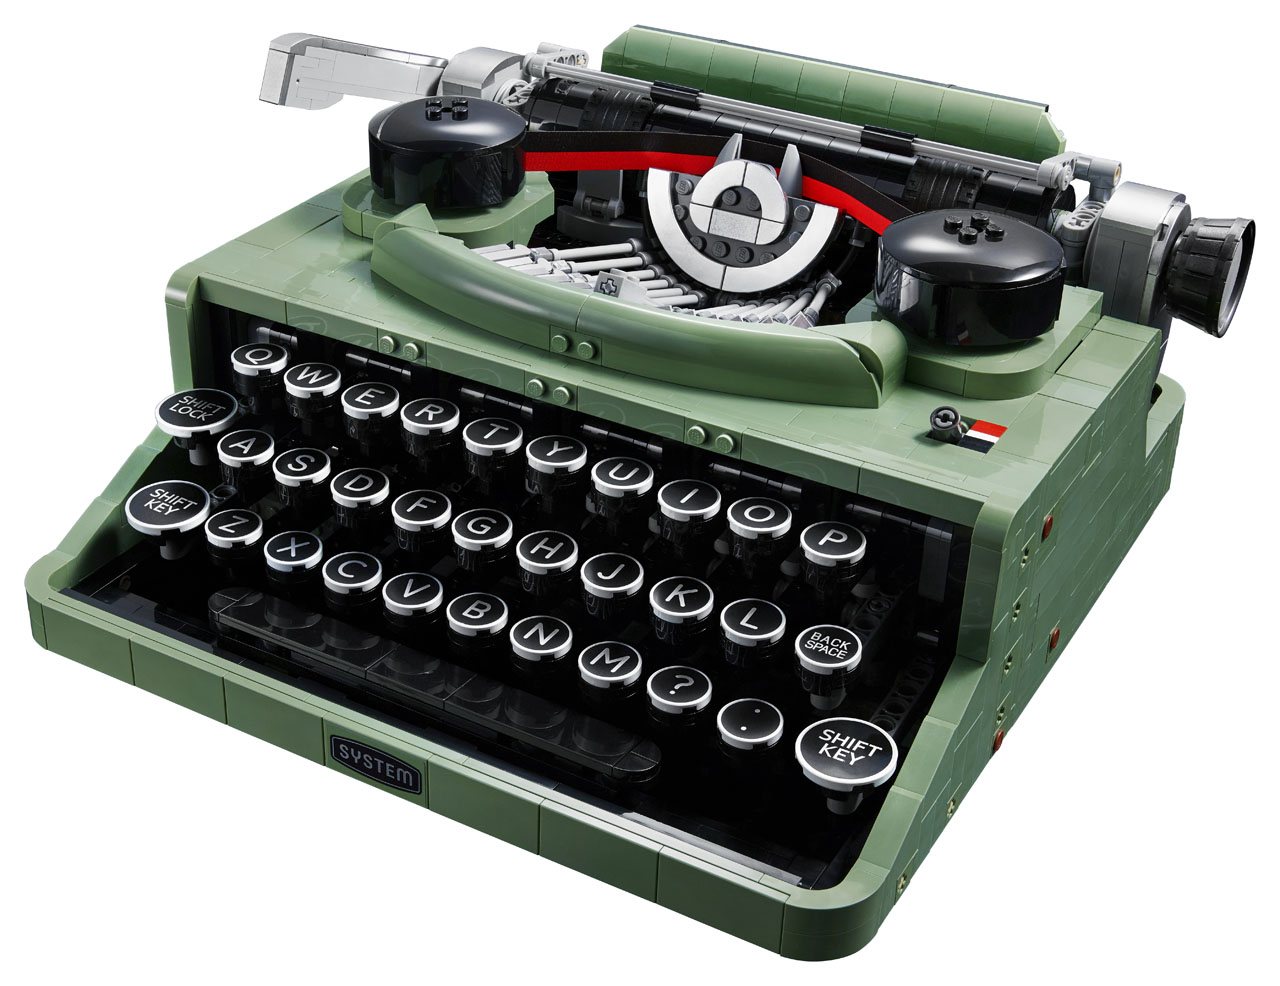 LEGO Ideas Typewriter (21327) Officially Announced - The Brick Fan